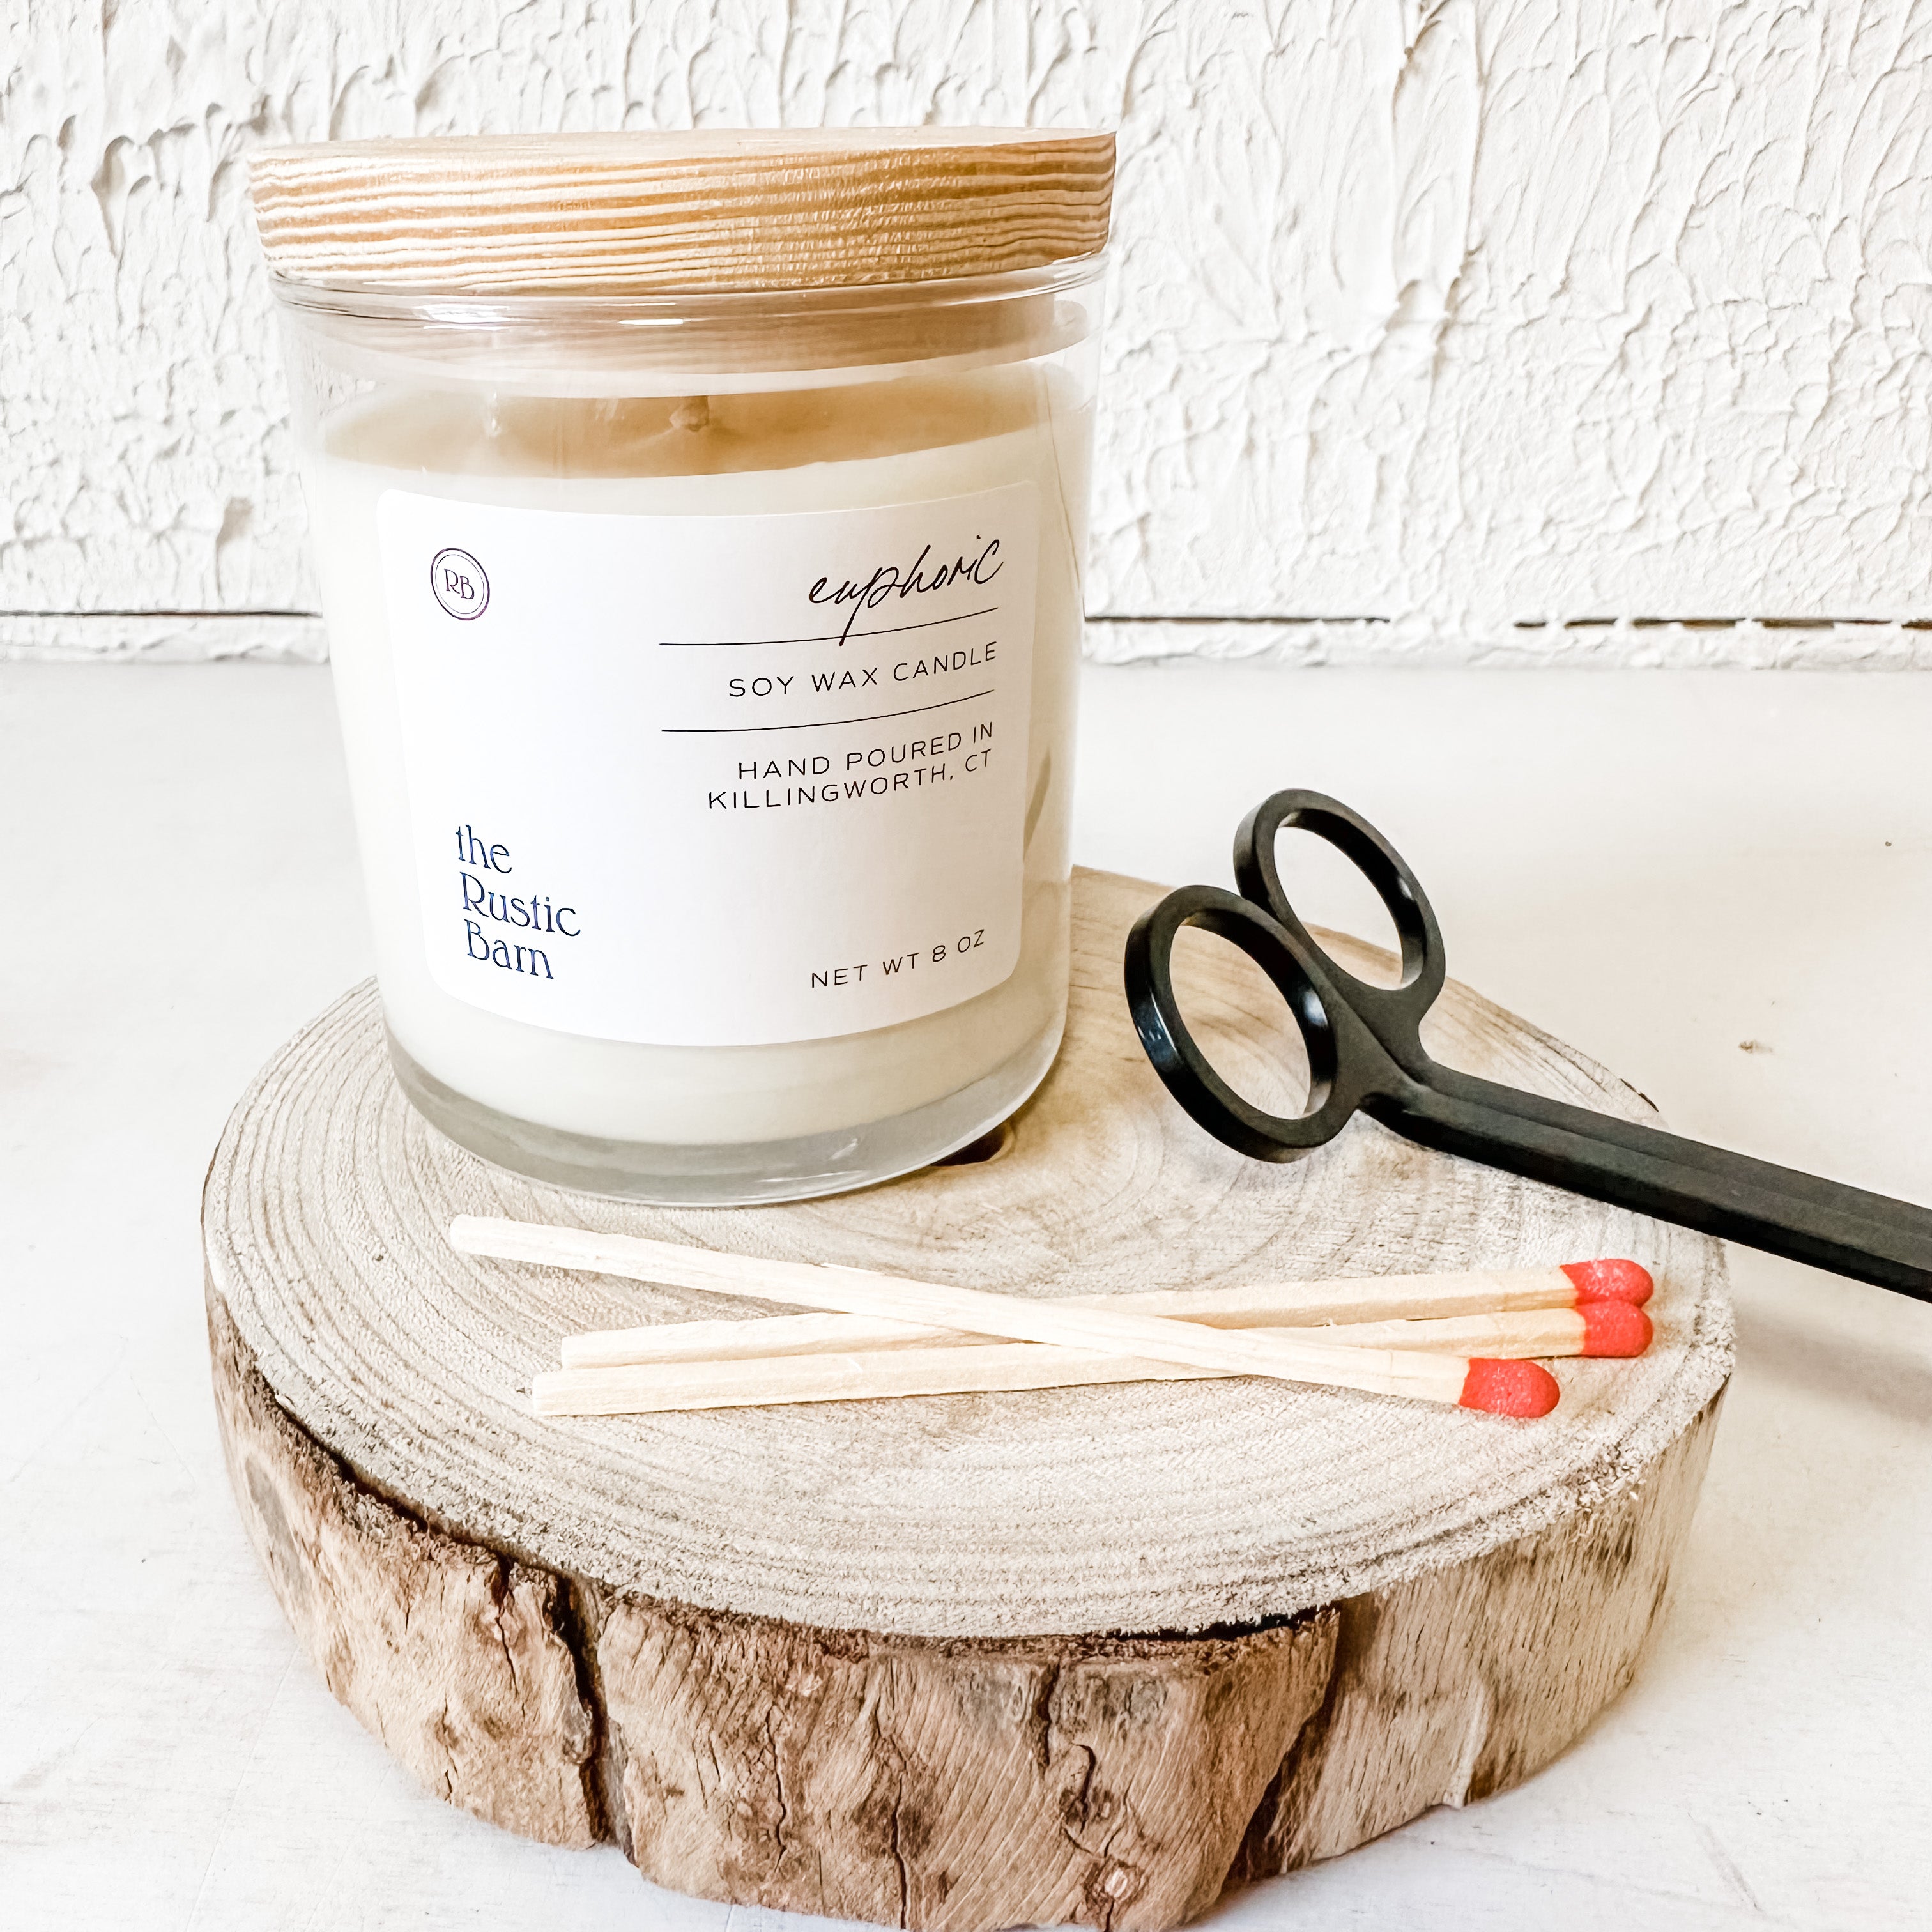 Euphoric Hand Poured Soy Candle